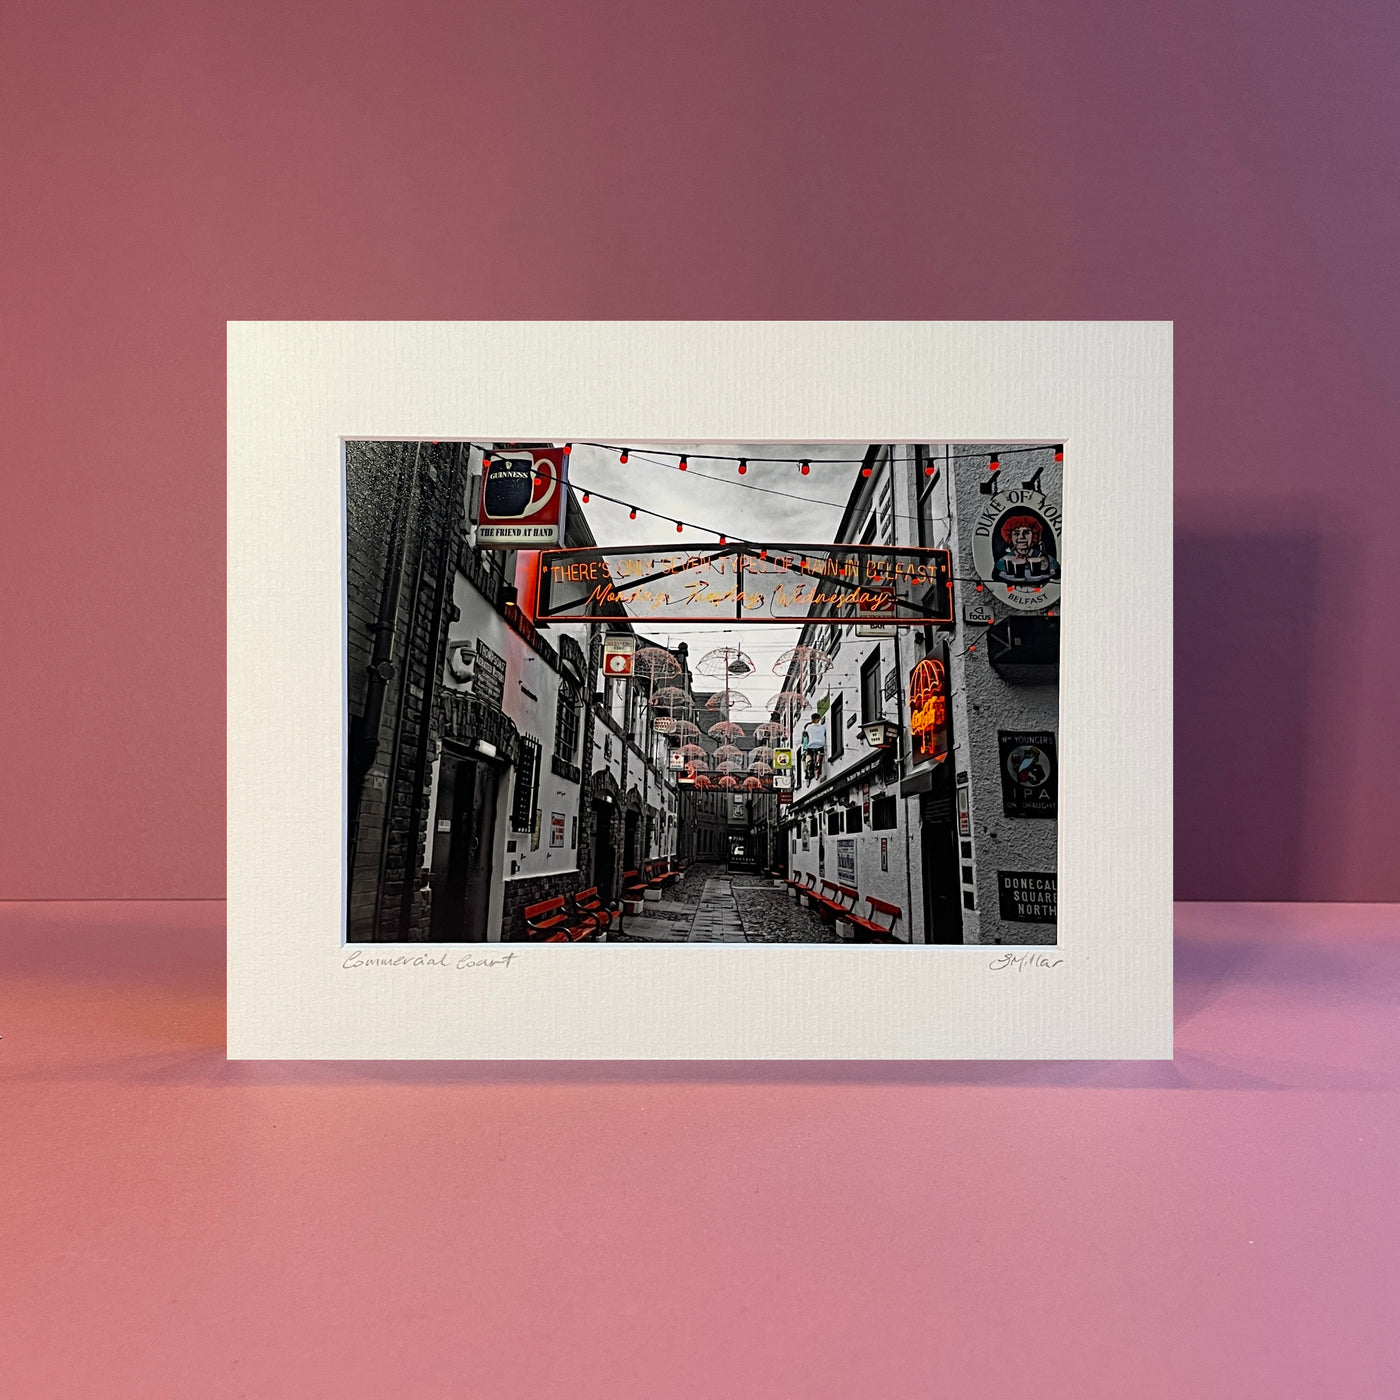 Commercial Court - Photographic Print